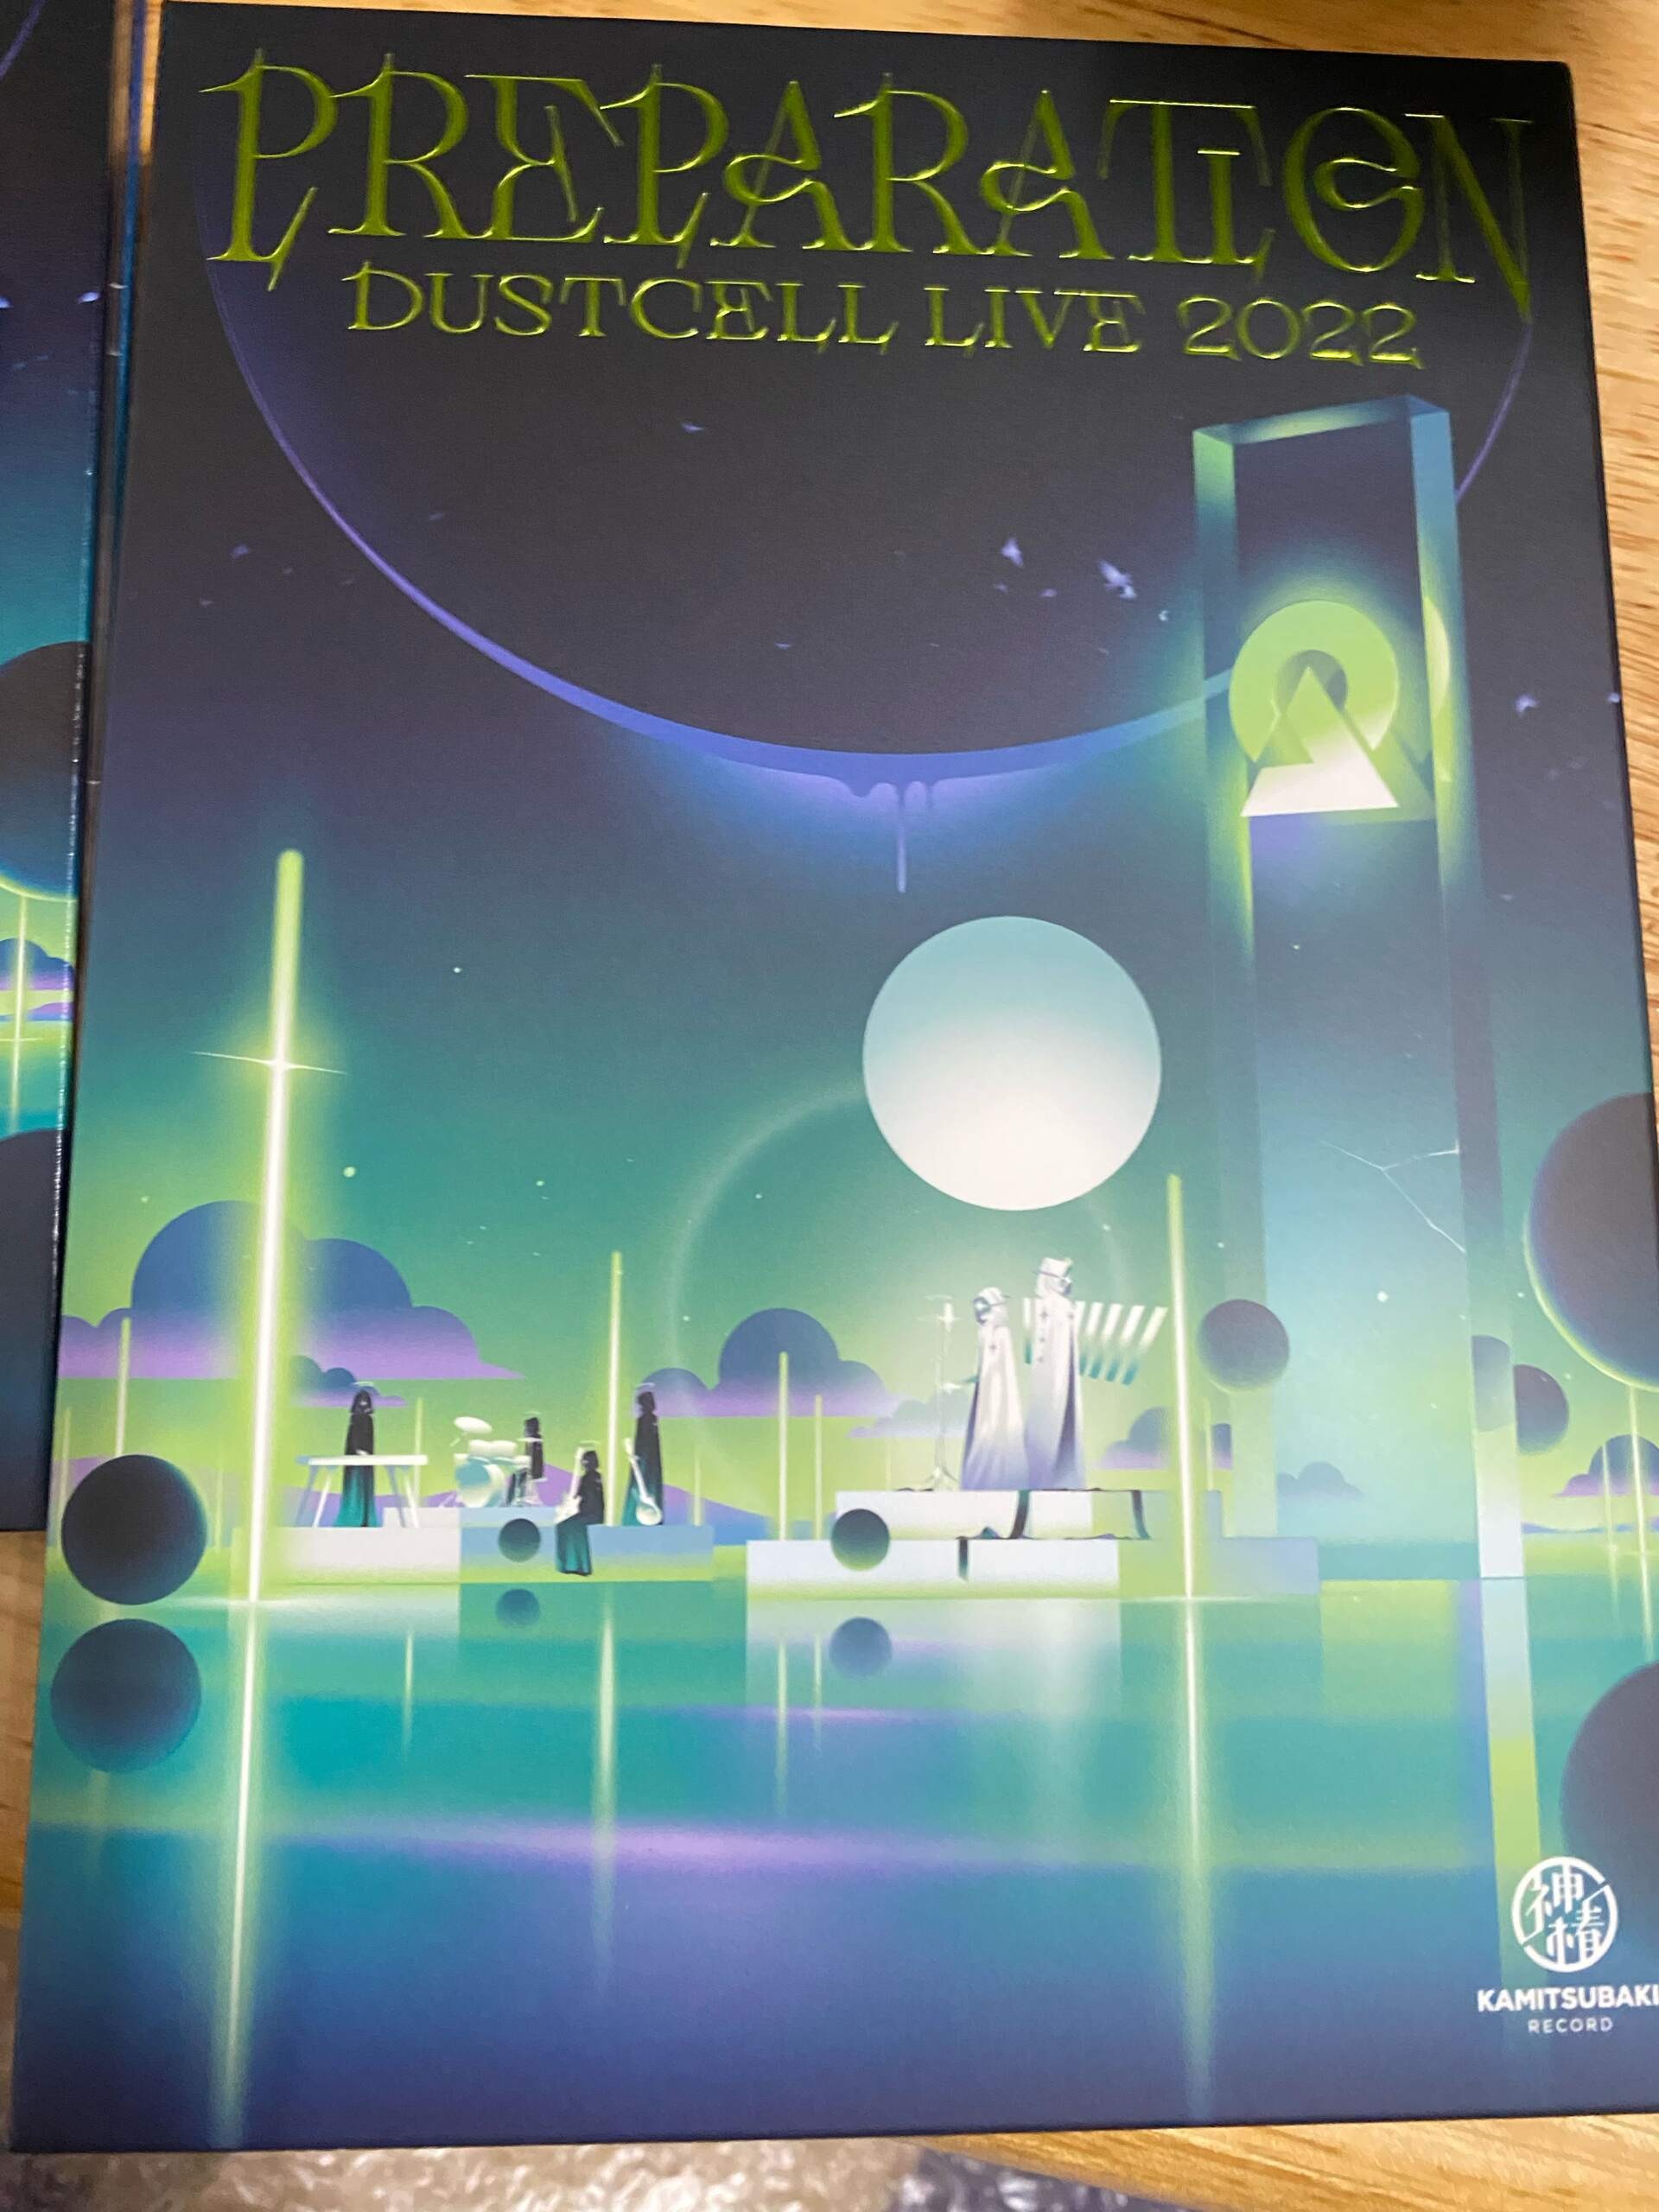 DUSTCELL LIVE 2022「PREPARATION」LIVE Blu-ray 心得分享- tayi0910的